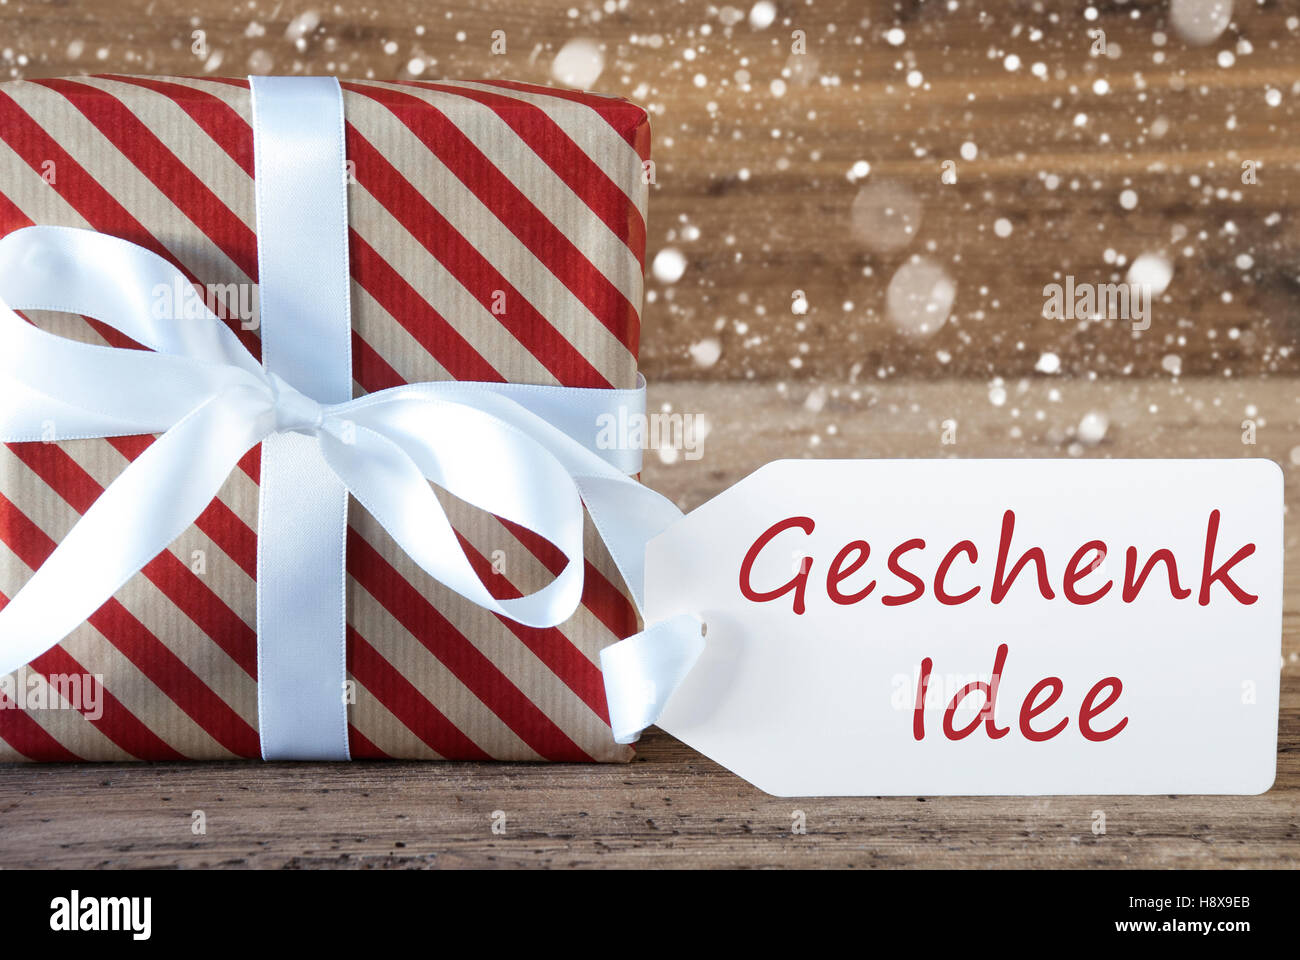 Present With Snowflakes, Text Geschenk Idee Means Gift Idea Stock Photo